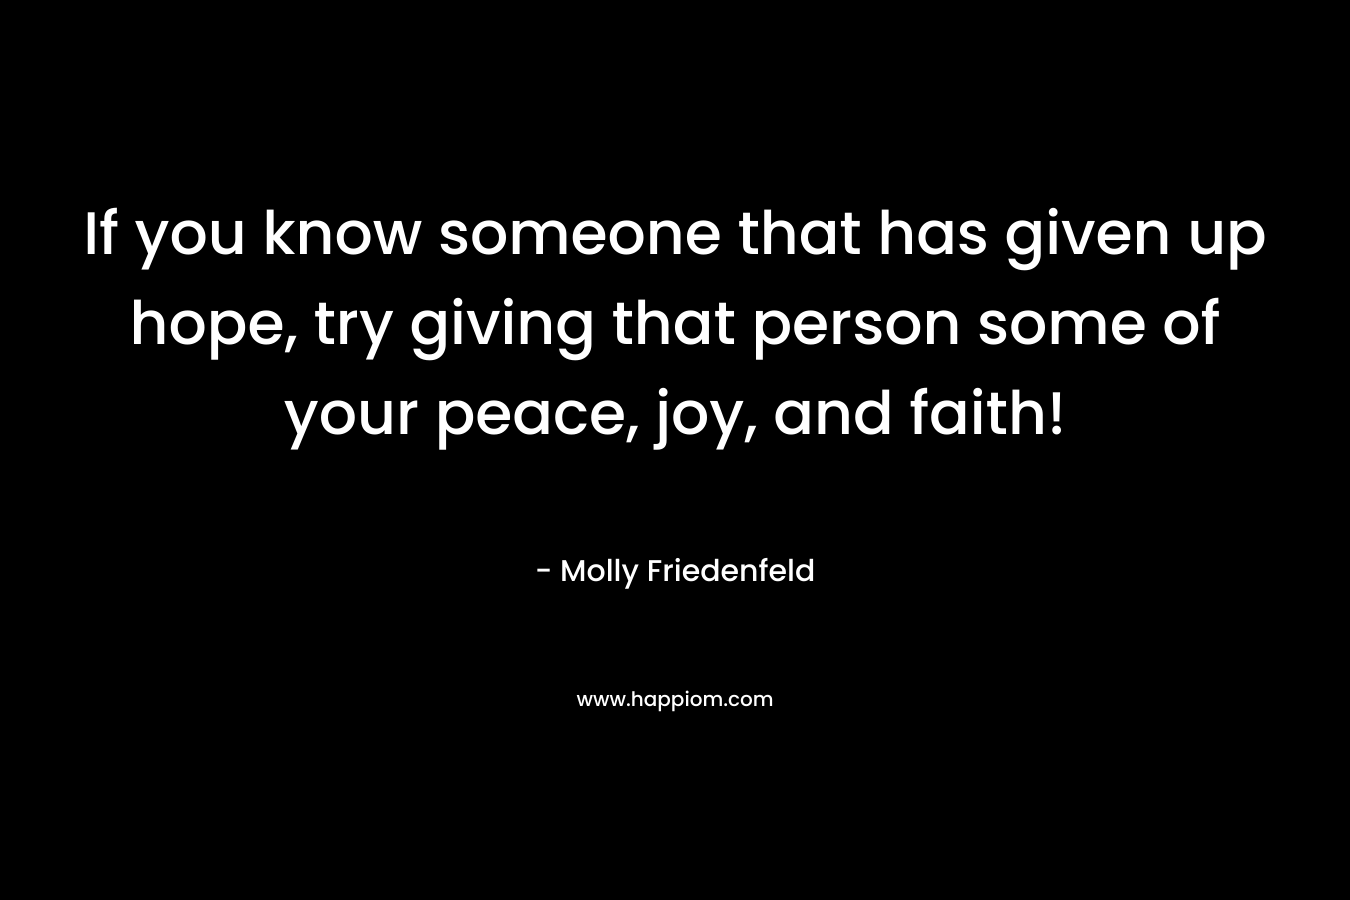 If you know someone that has given up hope, try giving that person some of your peace, joy, and faith! – Molly Friedenfeld